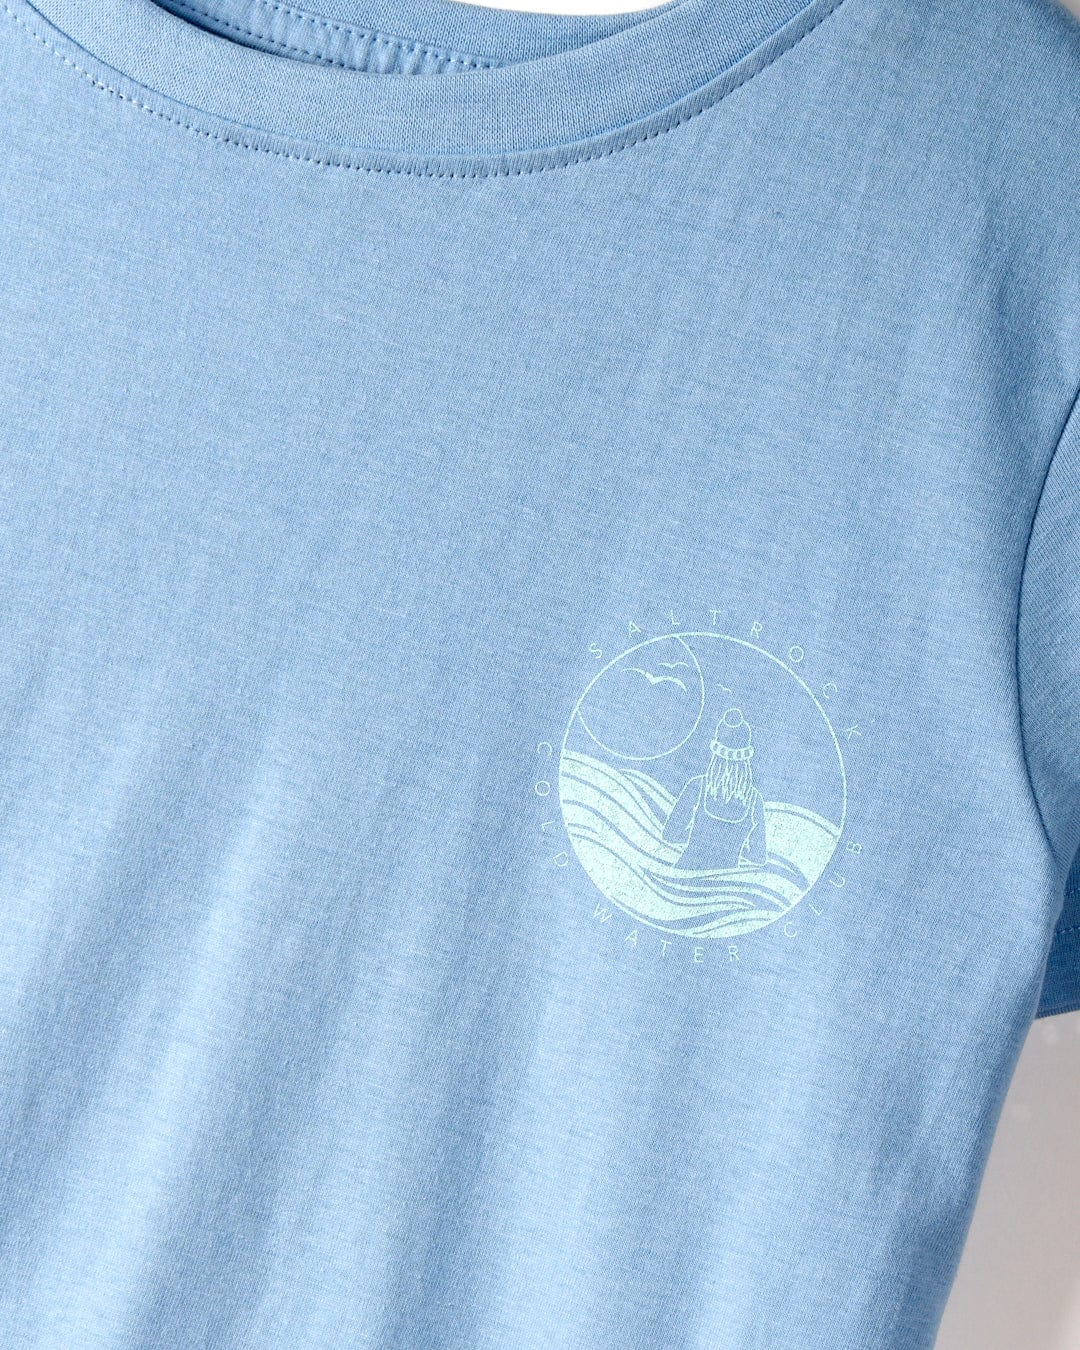 Close-up of a light blue t-shirt made from 100% cotton, featuring a small circular design on the chest. The design depicts a person sitting by the water with moon and wave elements, labeled "Cold Water Club - Womens T-Shirt - Blue" by Saltrock.